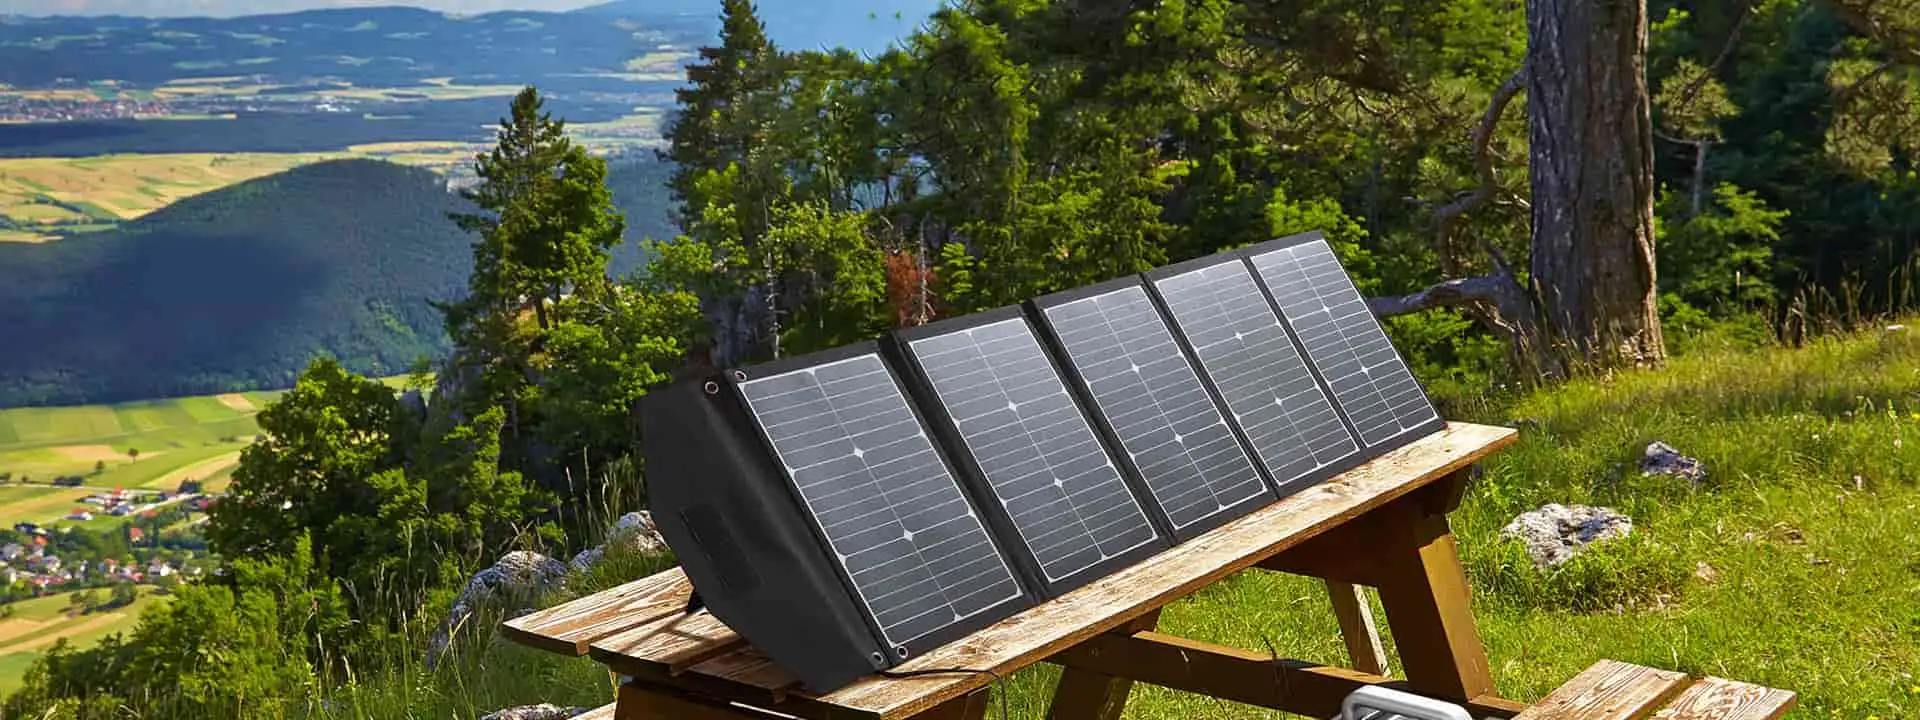 Portable Solar Panel Charger